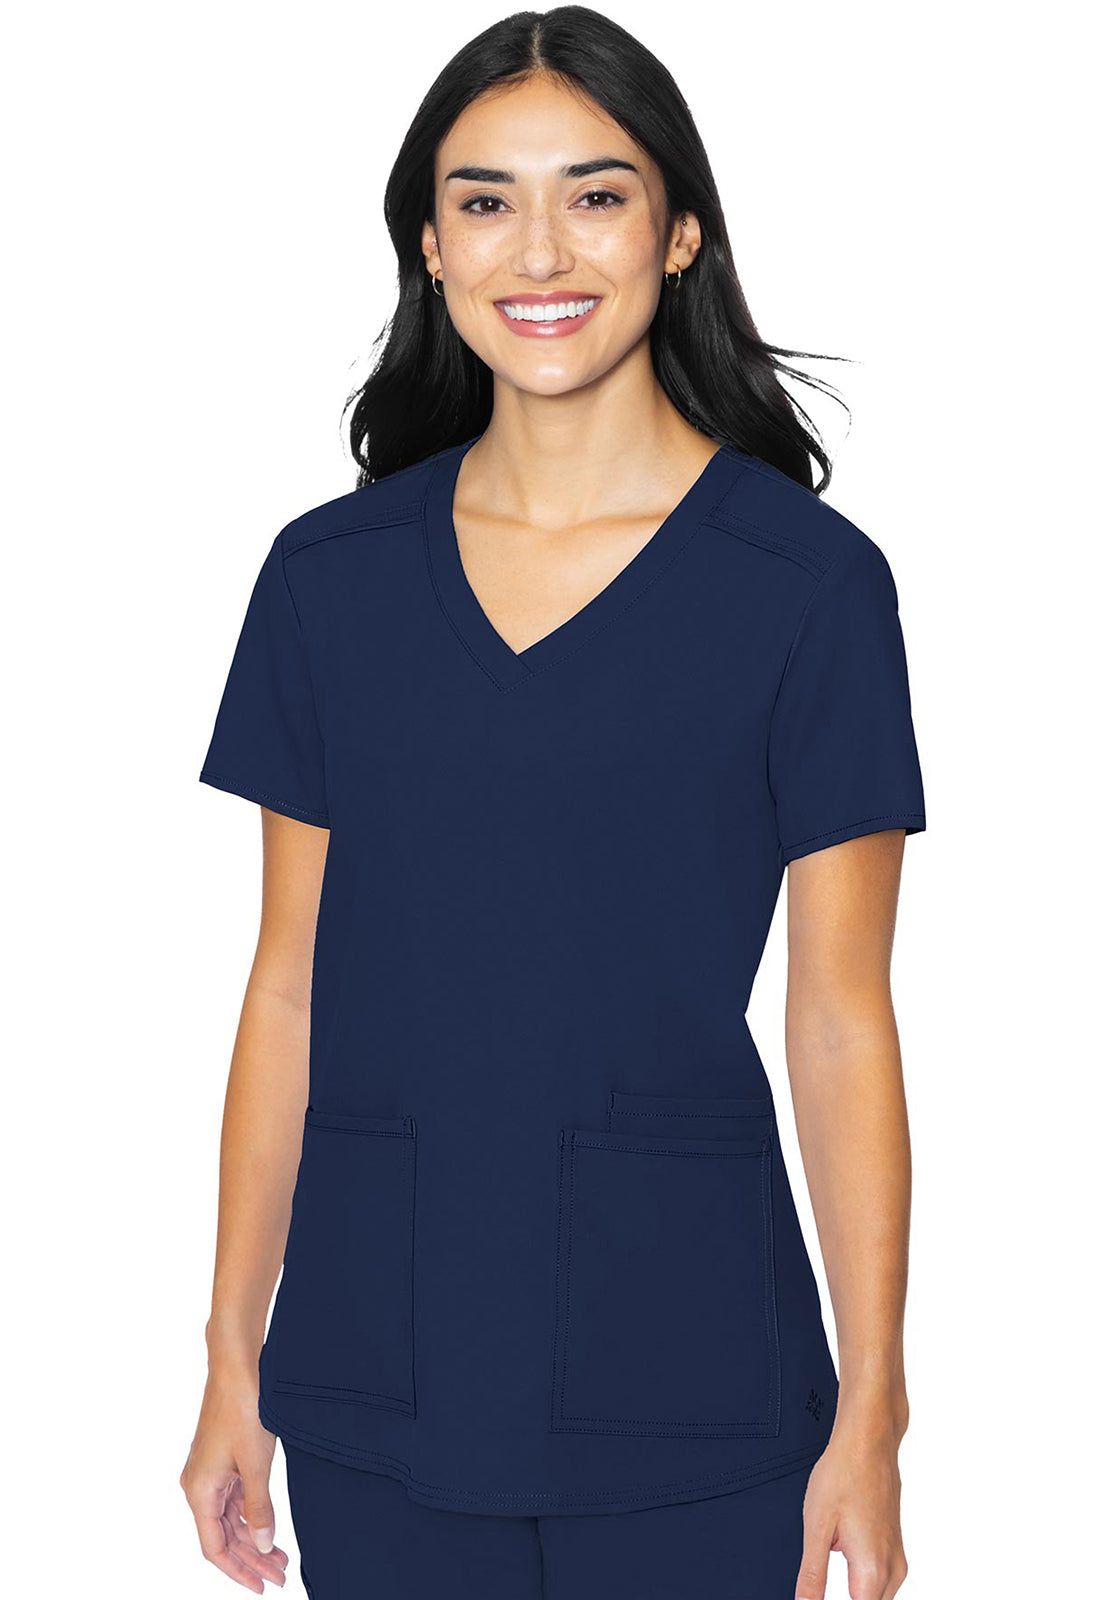 MC2411 - Med Couture Insight 3 Pocket Top